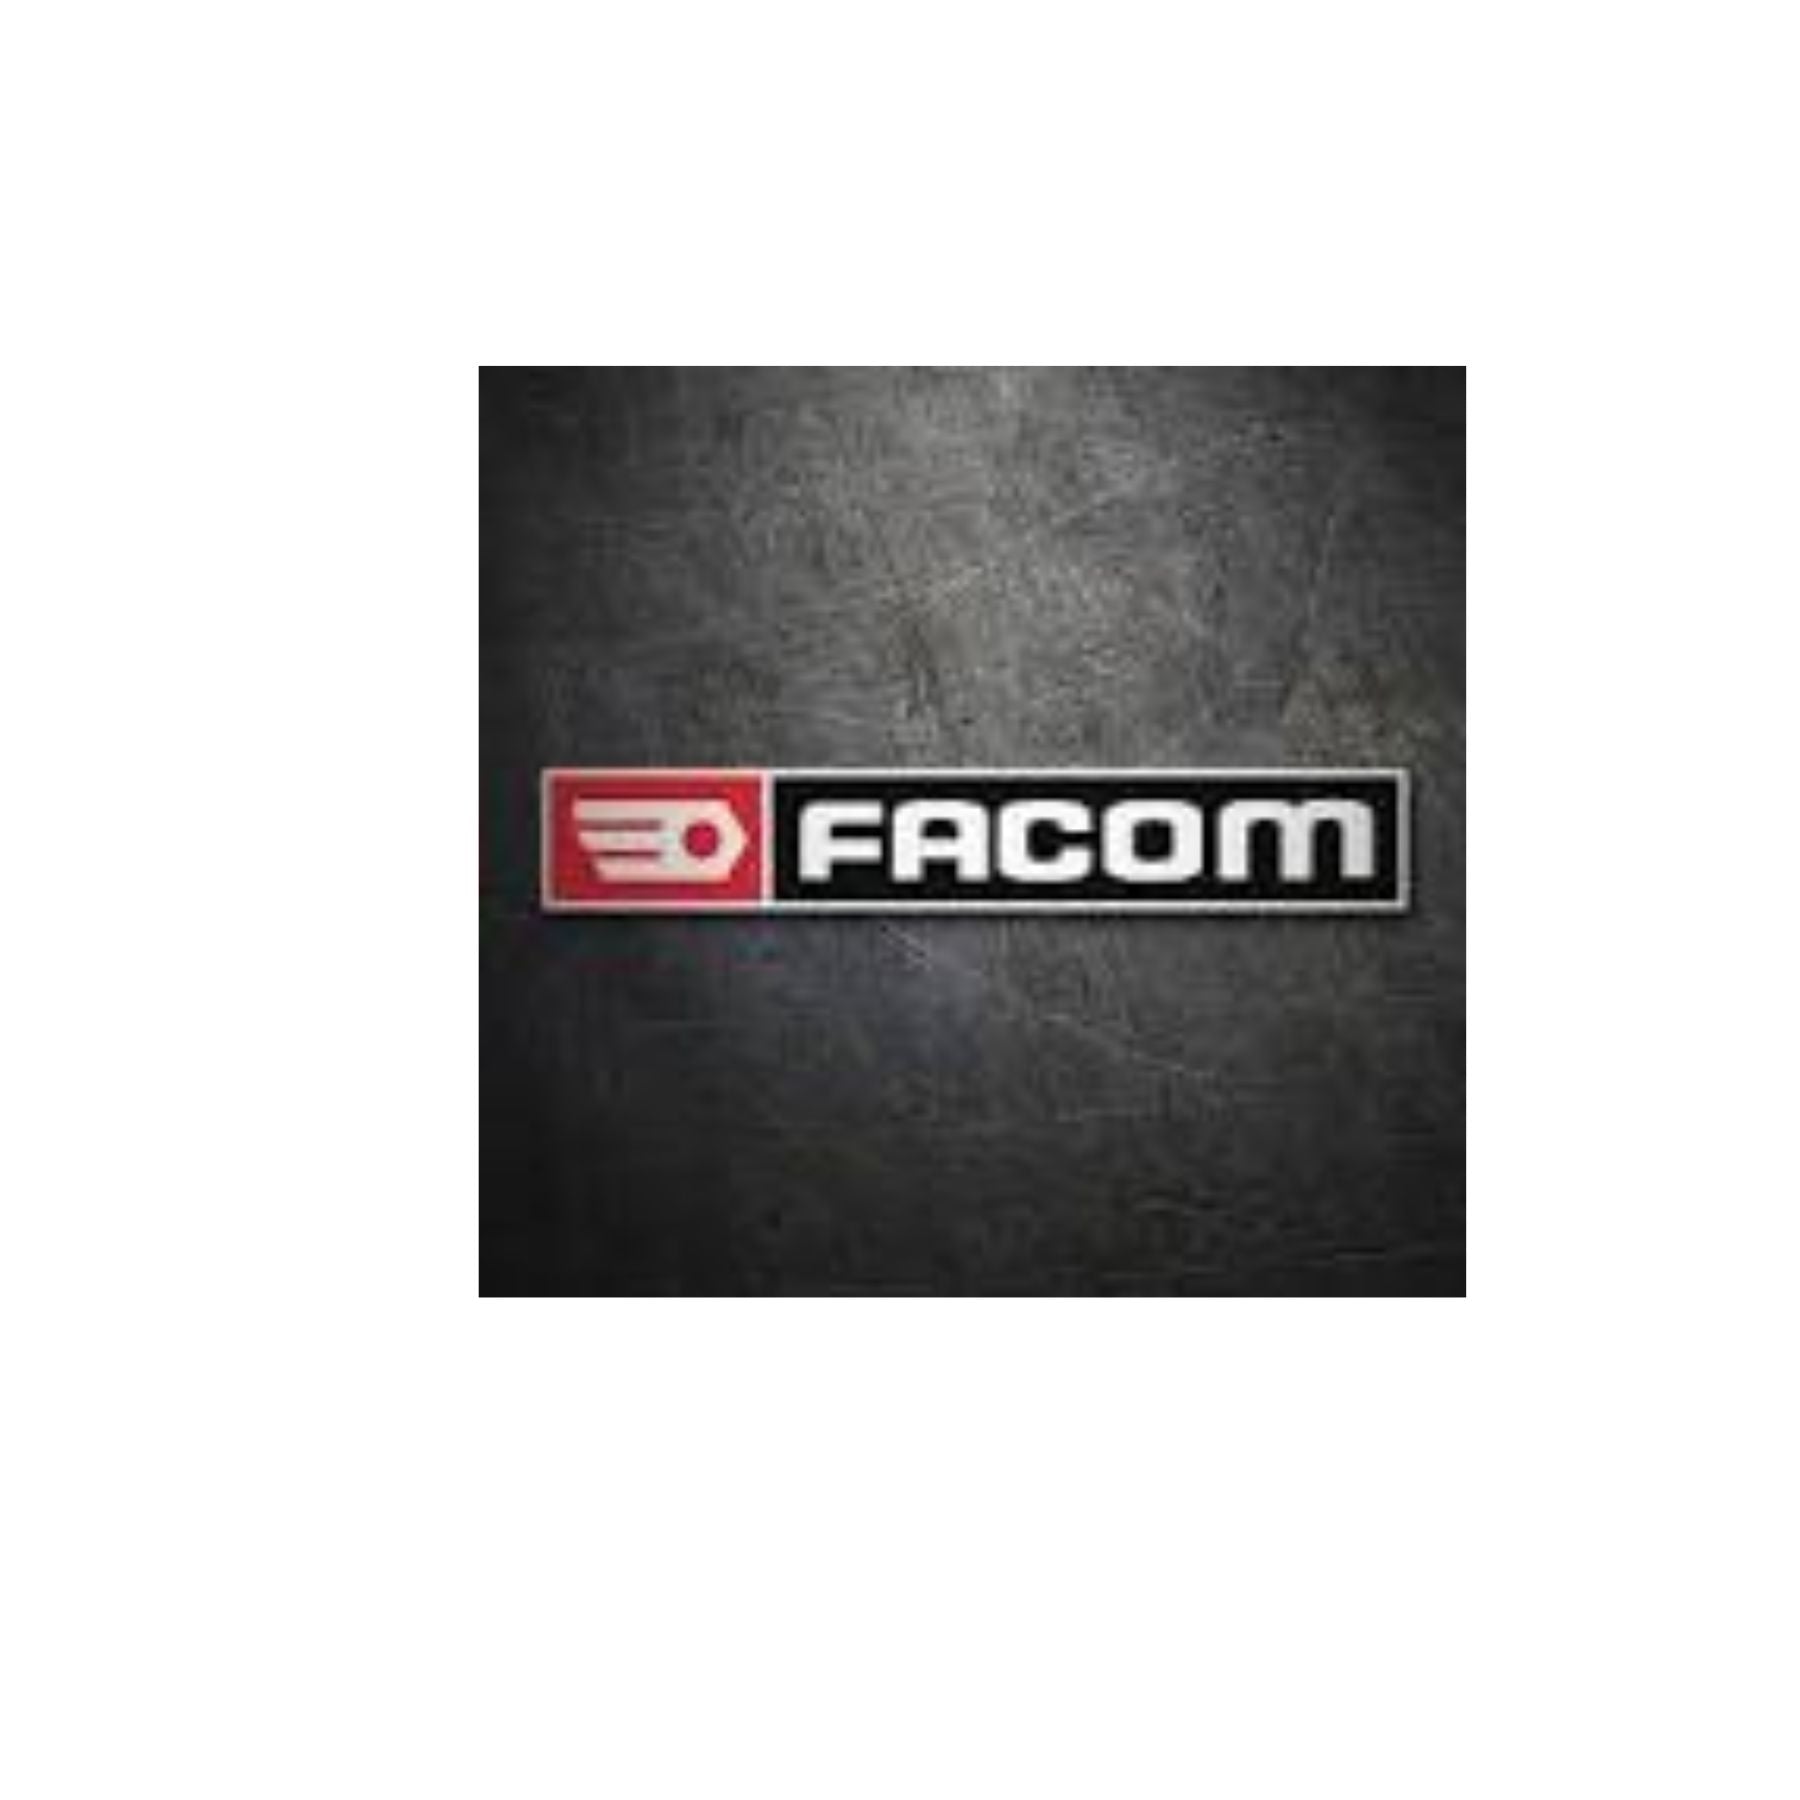 Facom E.306A30R Digital Electronic Torque Wrenches with Ratchet Capacity 1.5-30, Square 1/4